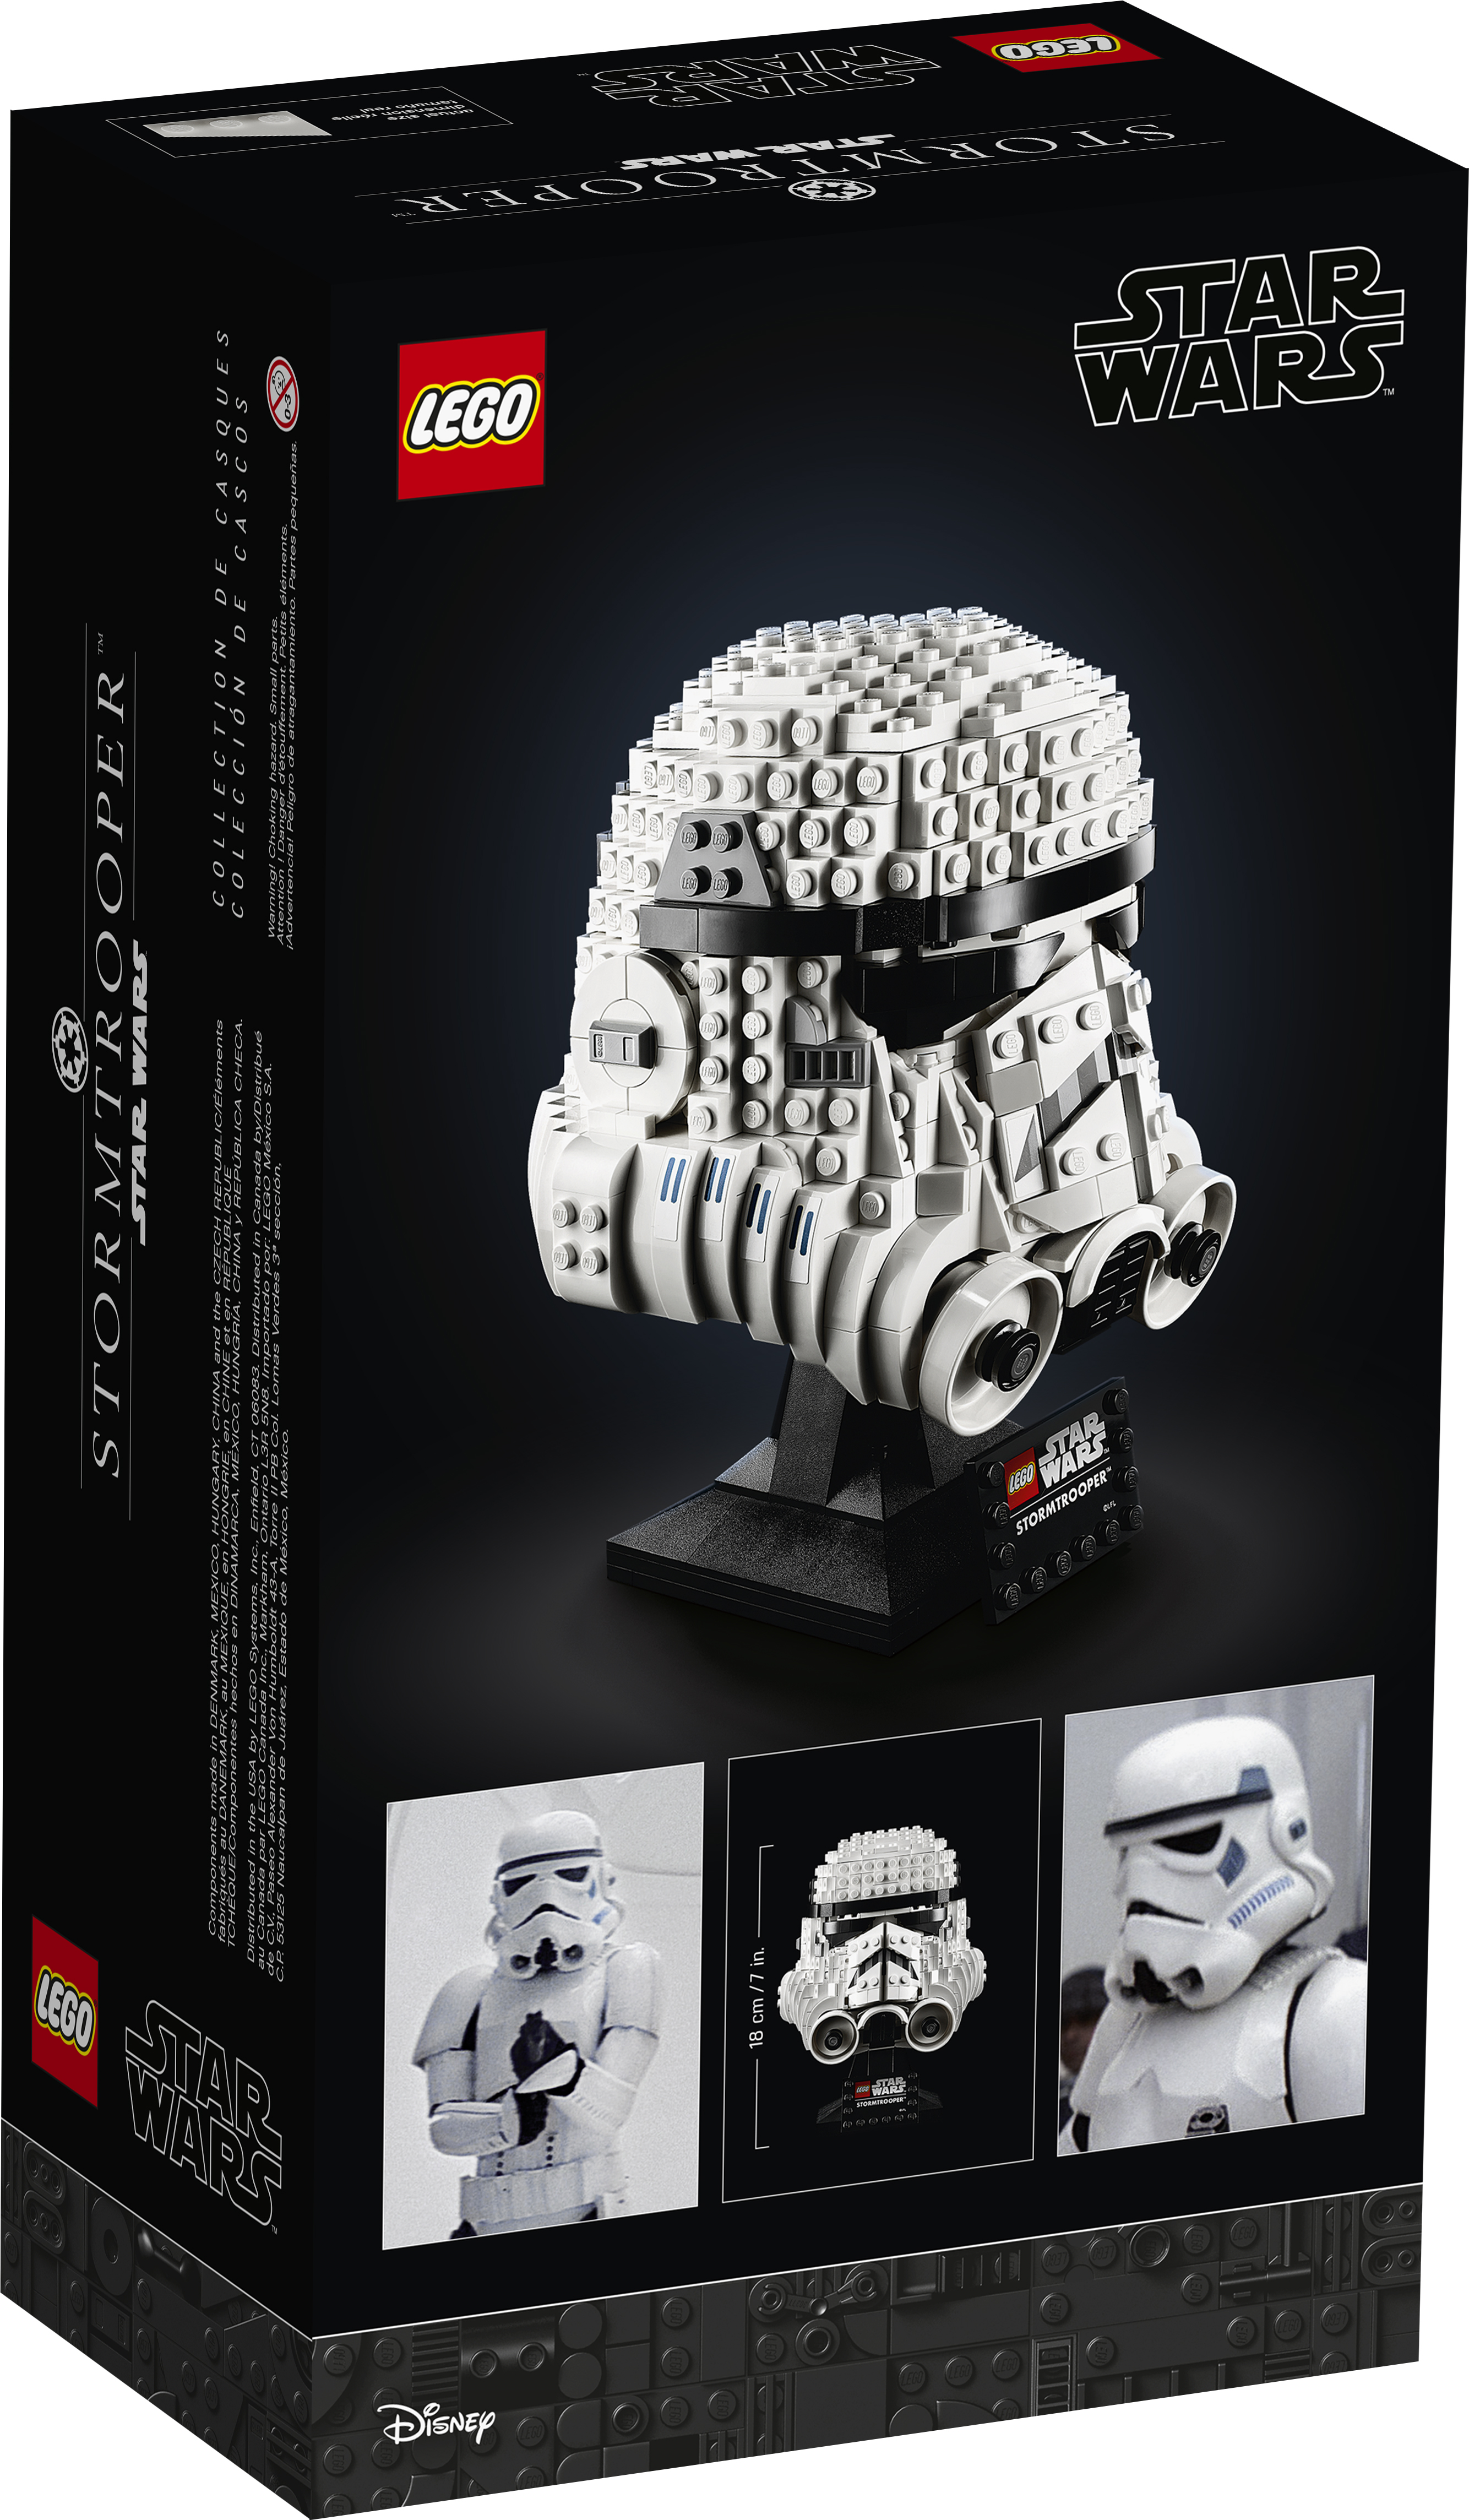 LEGO Star Wars Stormtrooper Helmet 75276 Building Kit, Cool Star Wars Collectible for Adults (647 Pieces) - image 5 of 8